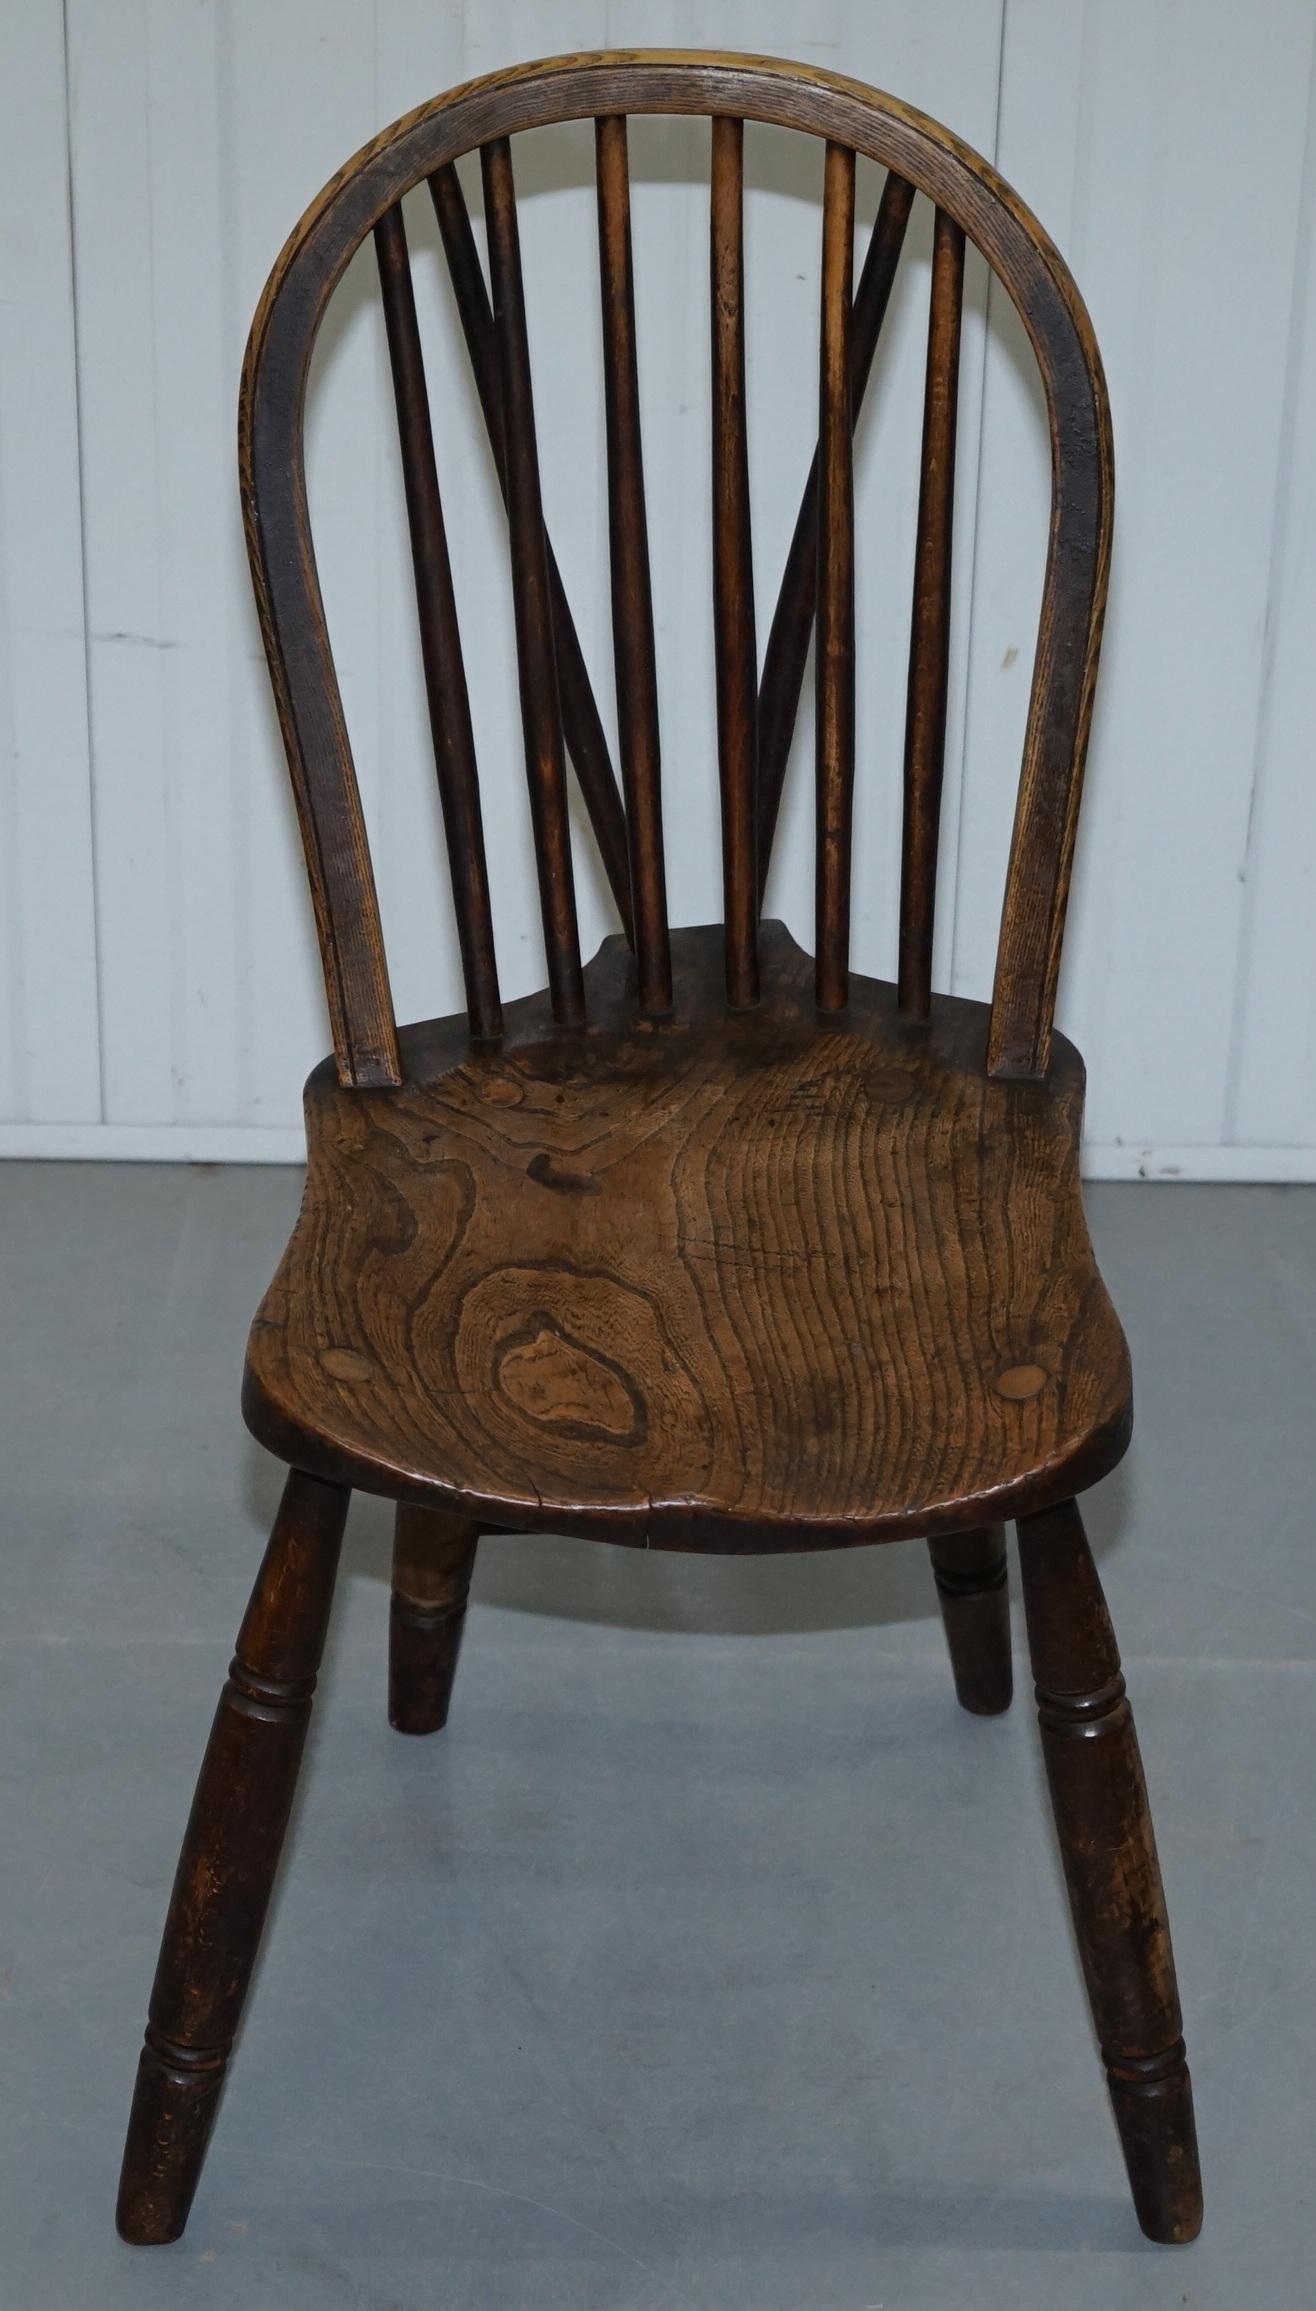 We are delighted to offer for sale this very rare original Glenister early Victorian elm Windsor hoop back dining chair, circa 1840 from High Wycombe for restoration 

I have a pair of these listed under my other items in excellent order 

The